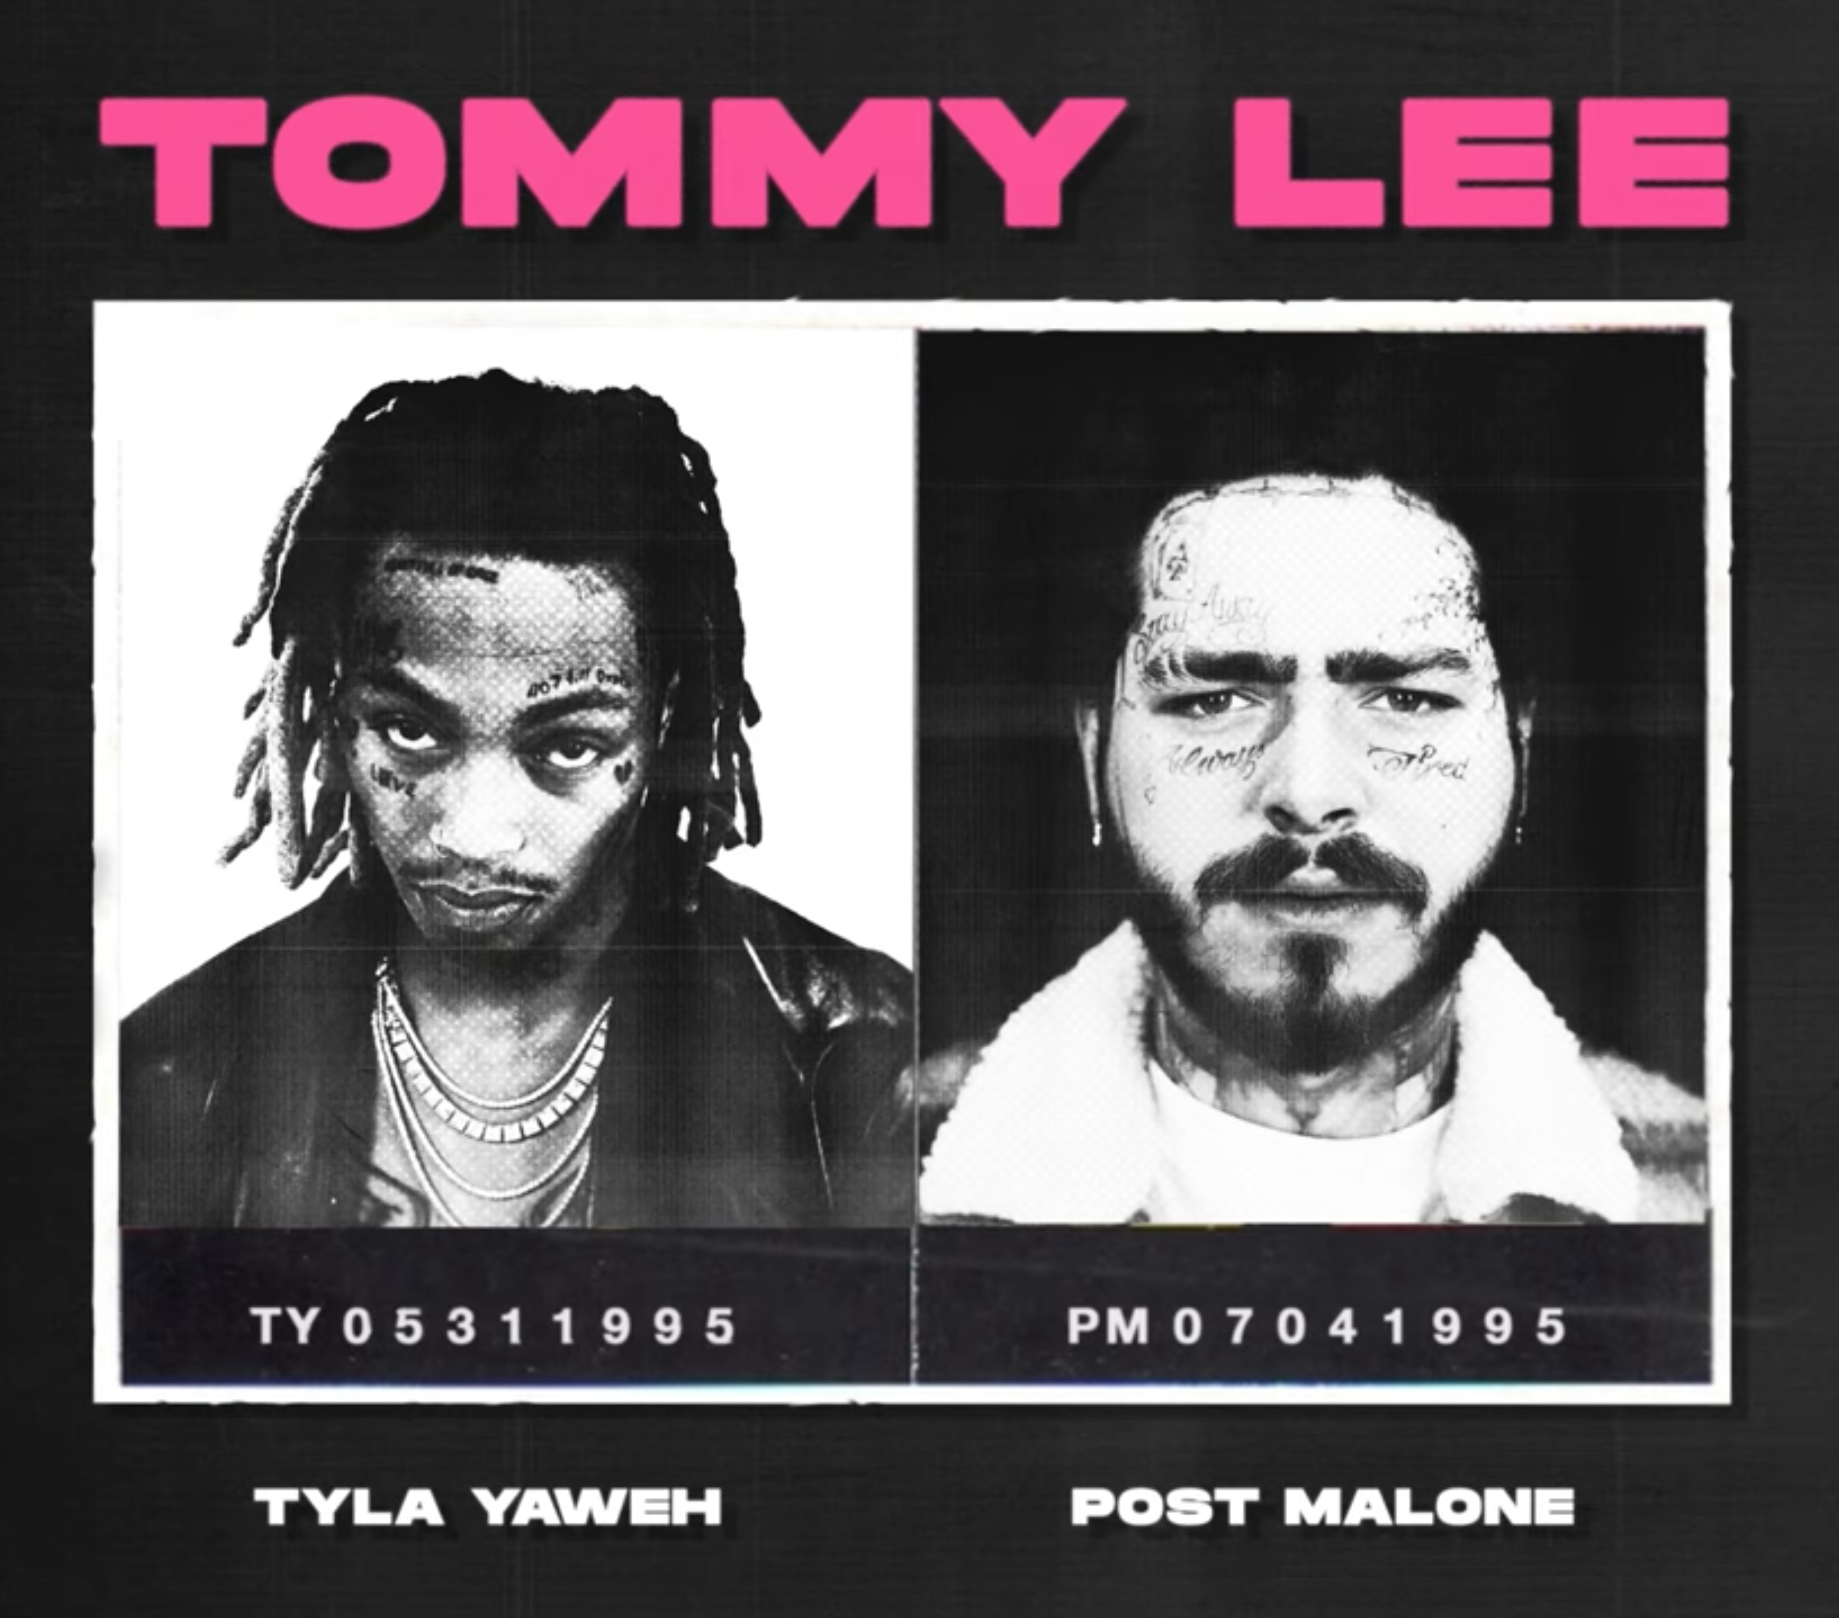 Good Groove or Bad Move: "Tommy Lee" - Tyla Yaweh ft. Post Malone